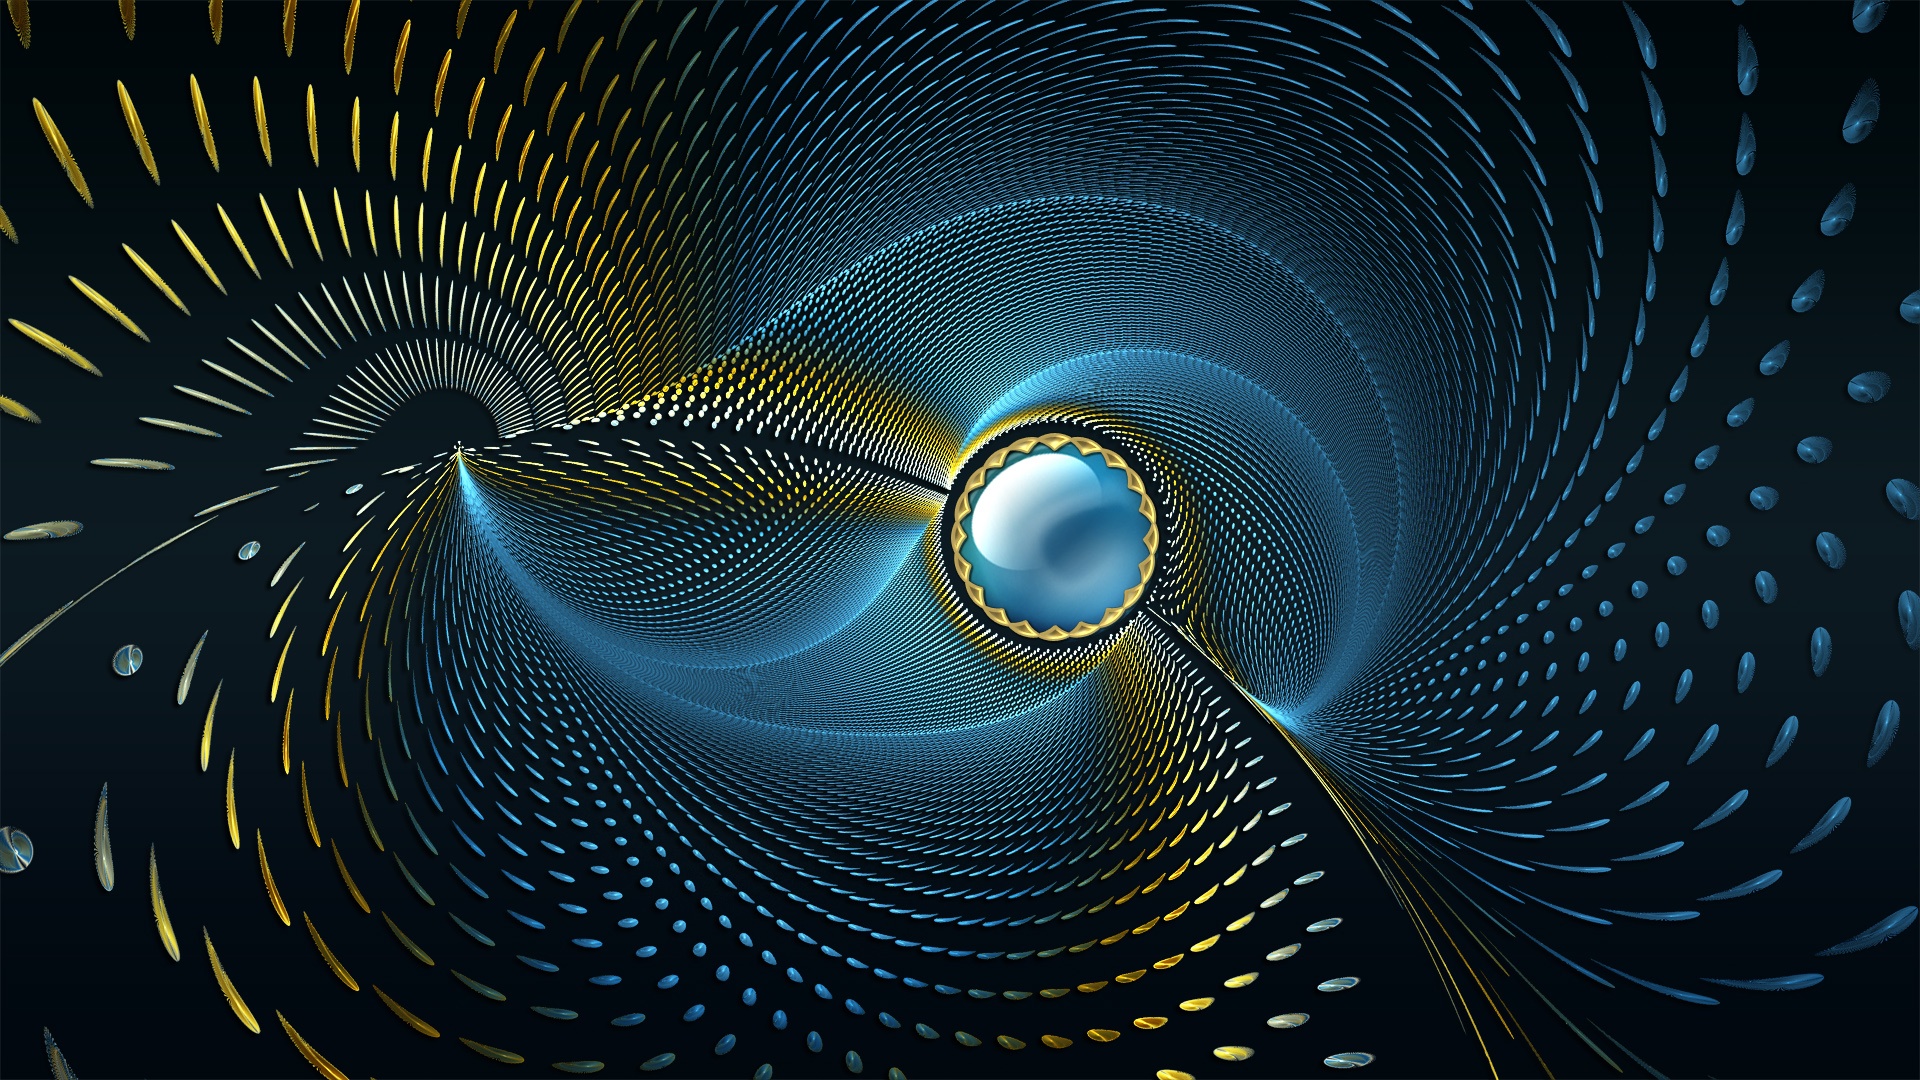 Abstraction 3D Graphics f wallpaper | 1920x1080 | 97441 | WallpaperUP